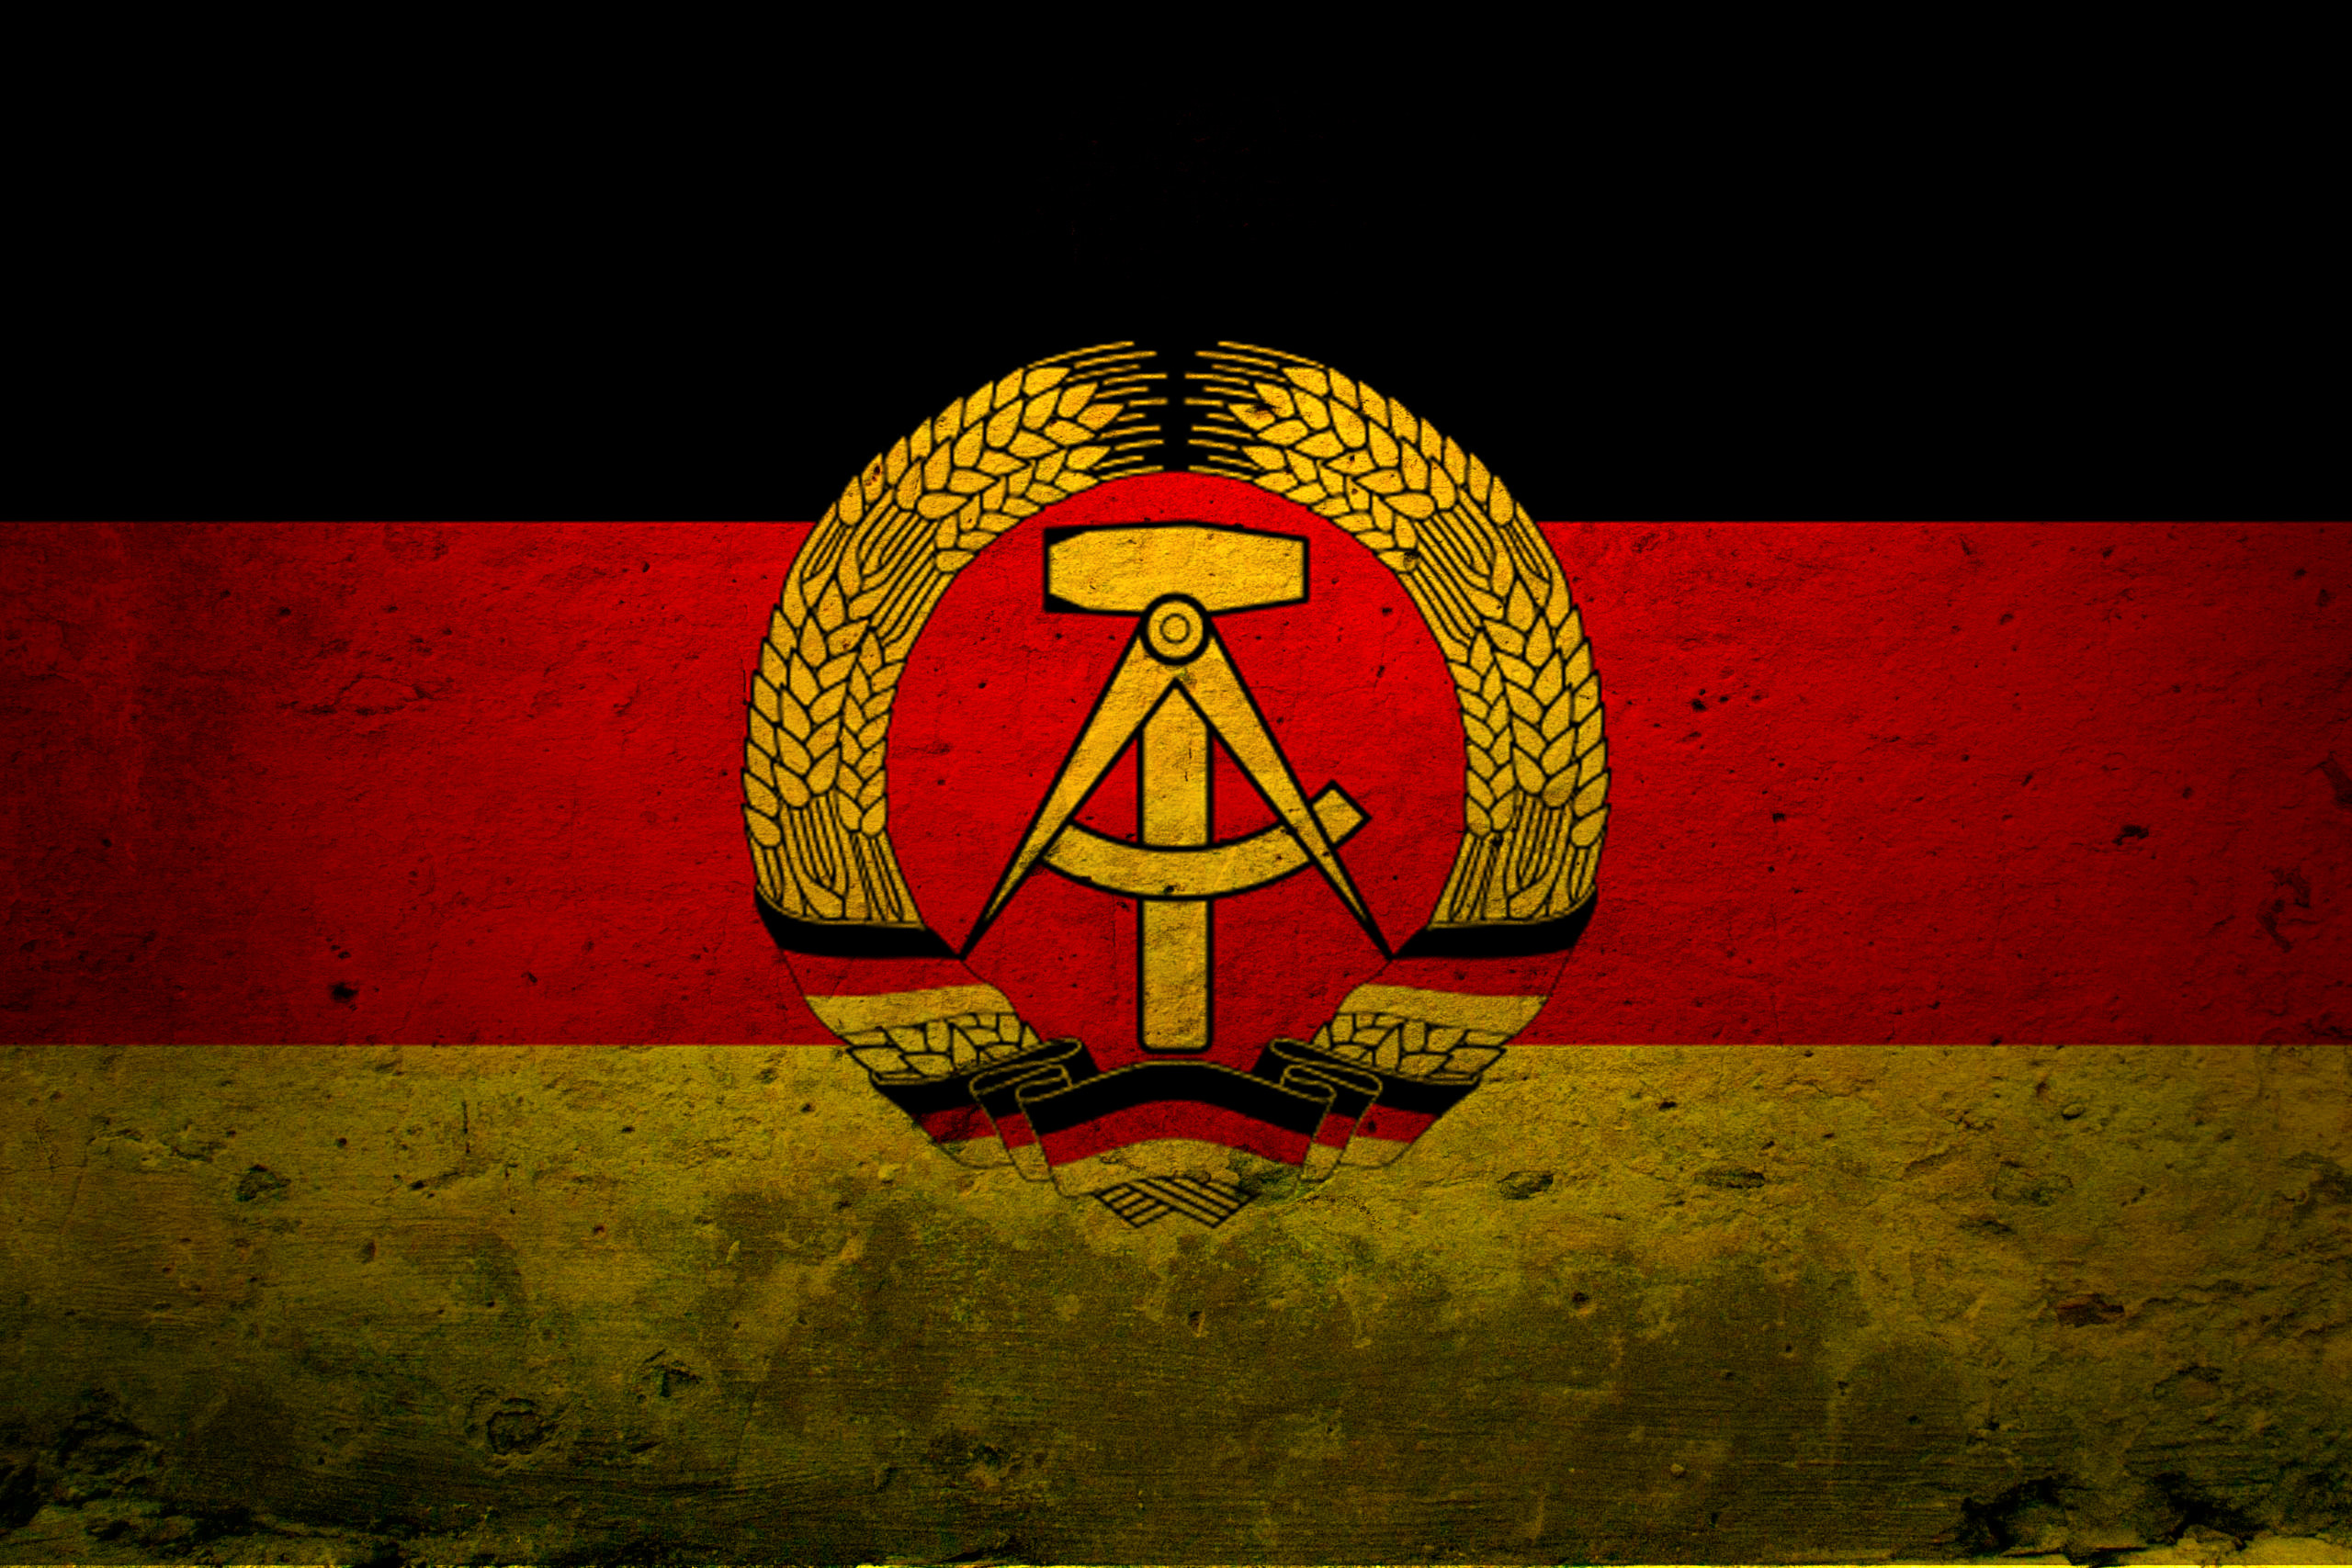 Germany Democratic Republic Flag Backgrounds For Presentation Ppt Backgrounds Templates 2560x1707